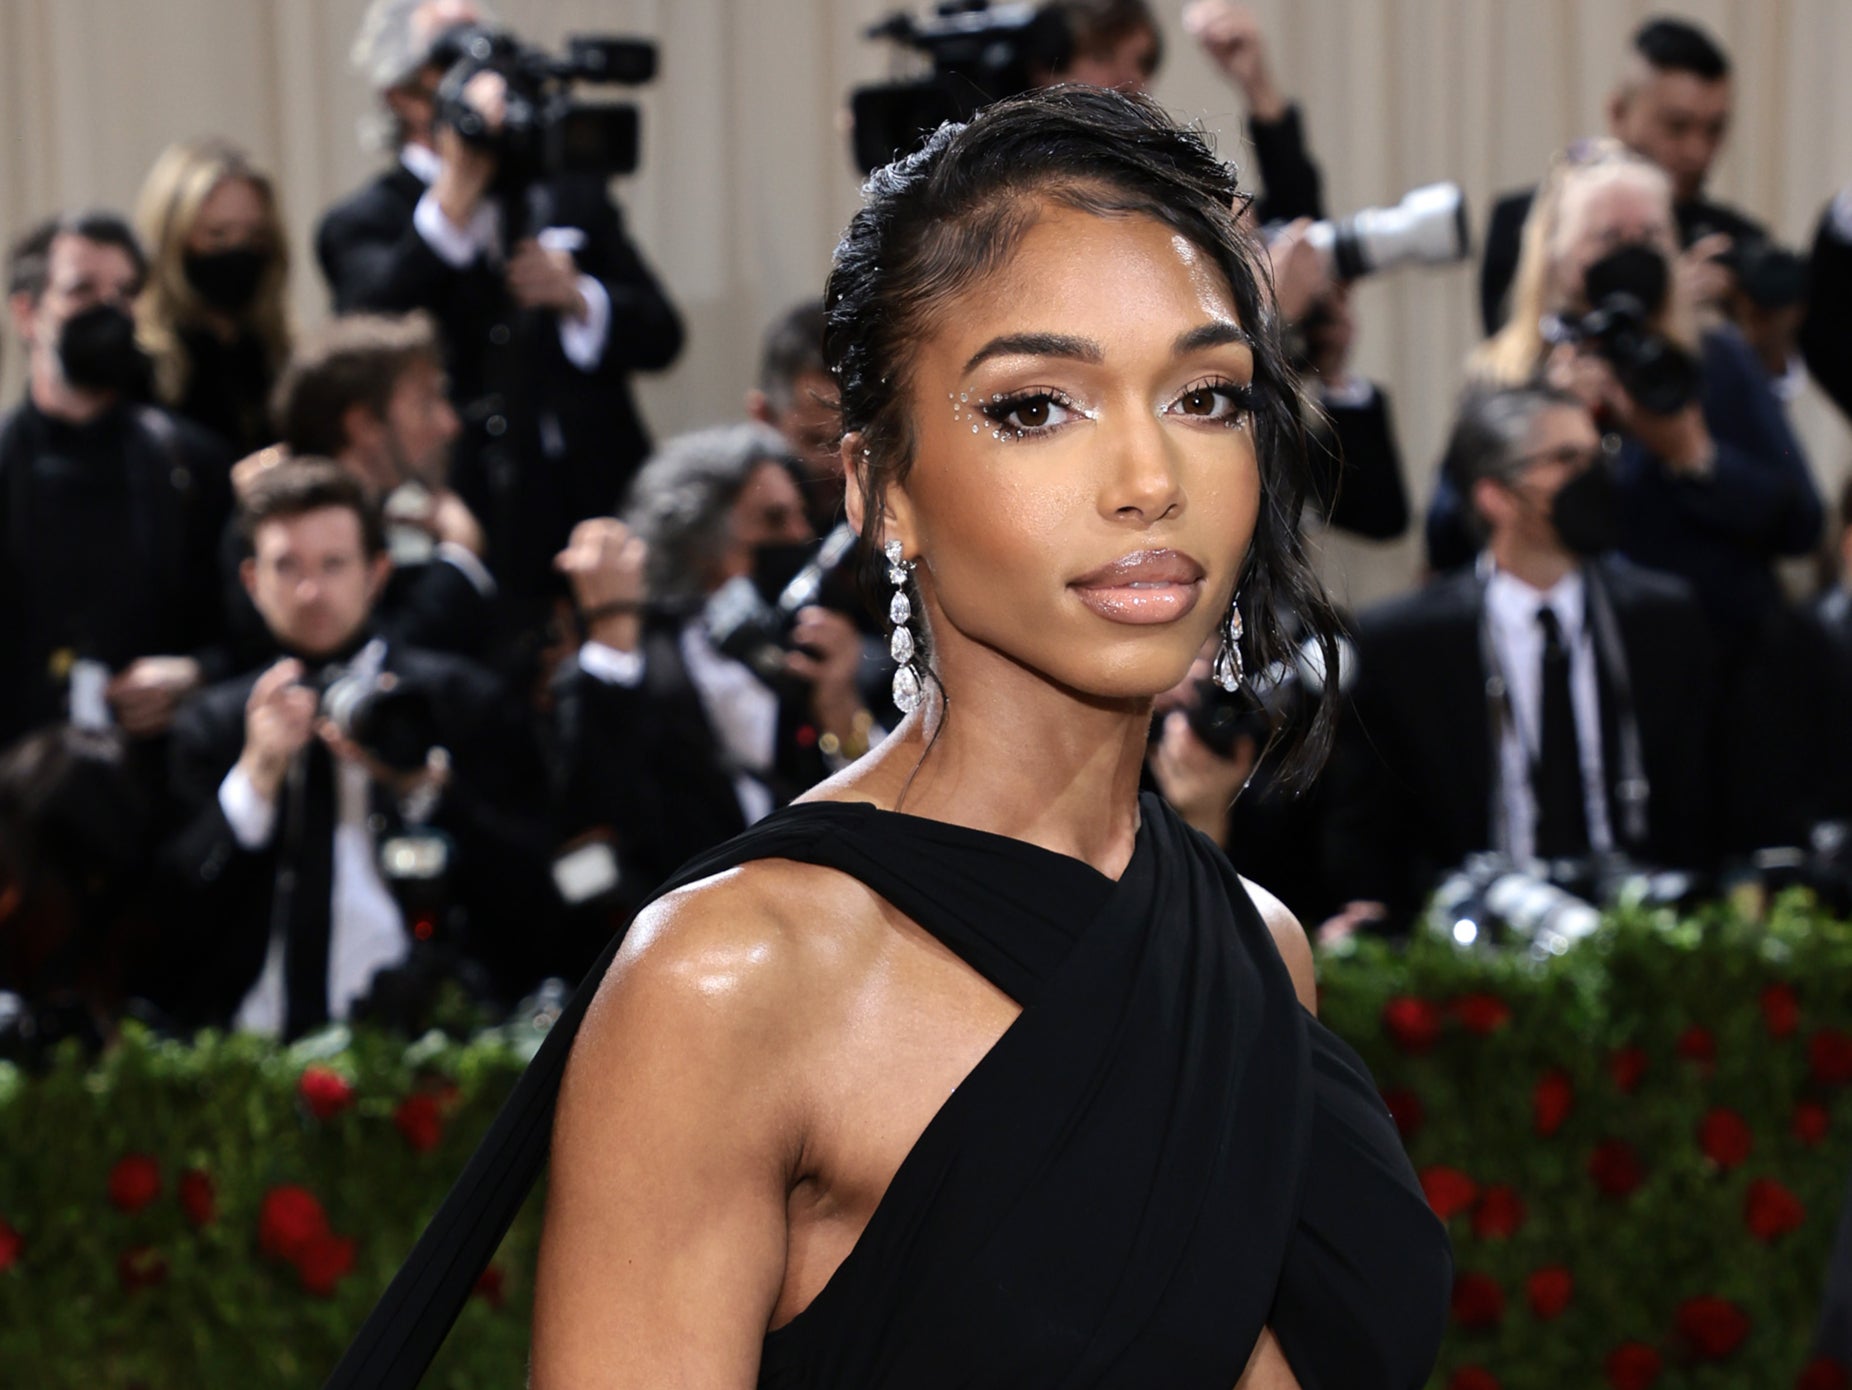 Lori Harvey says she’s ‘dating on her own terms’ following Michael B